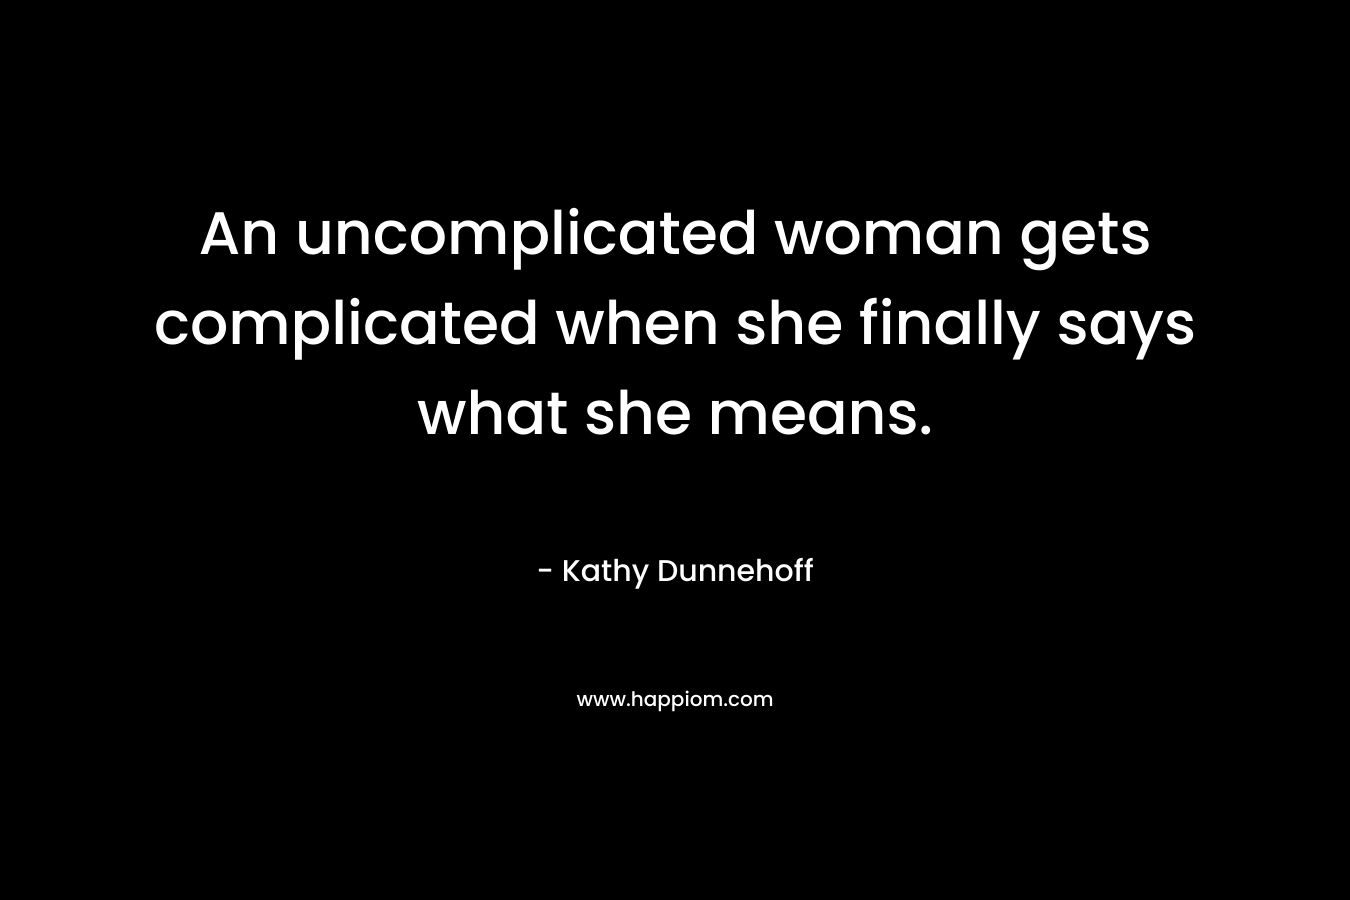 An uncomplicated woman gets complicated when she finally says what she means. – Kathy Dunnehoff